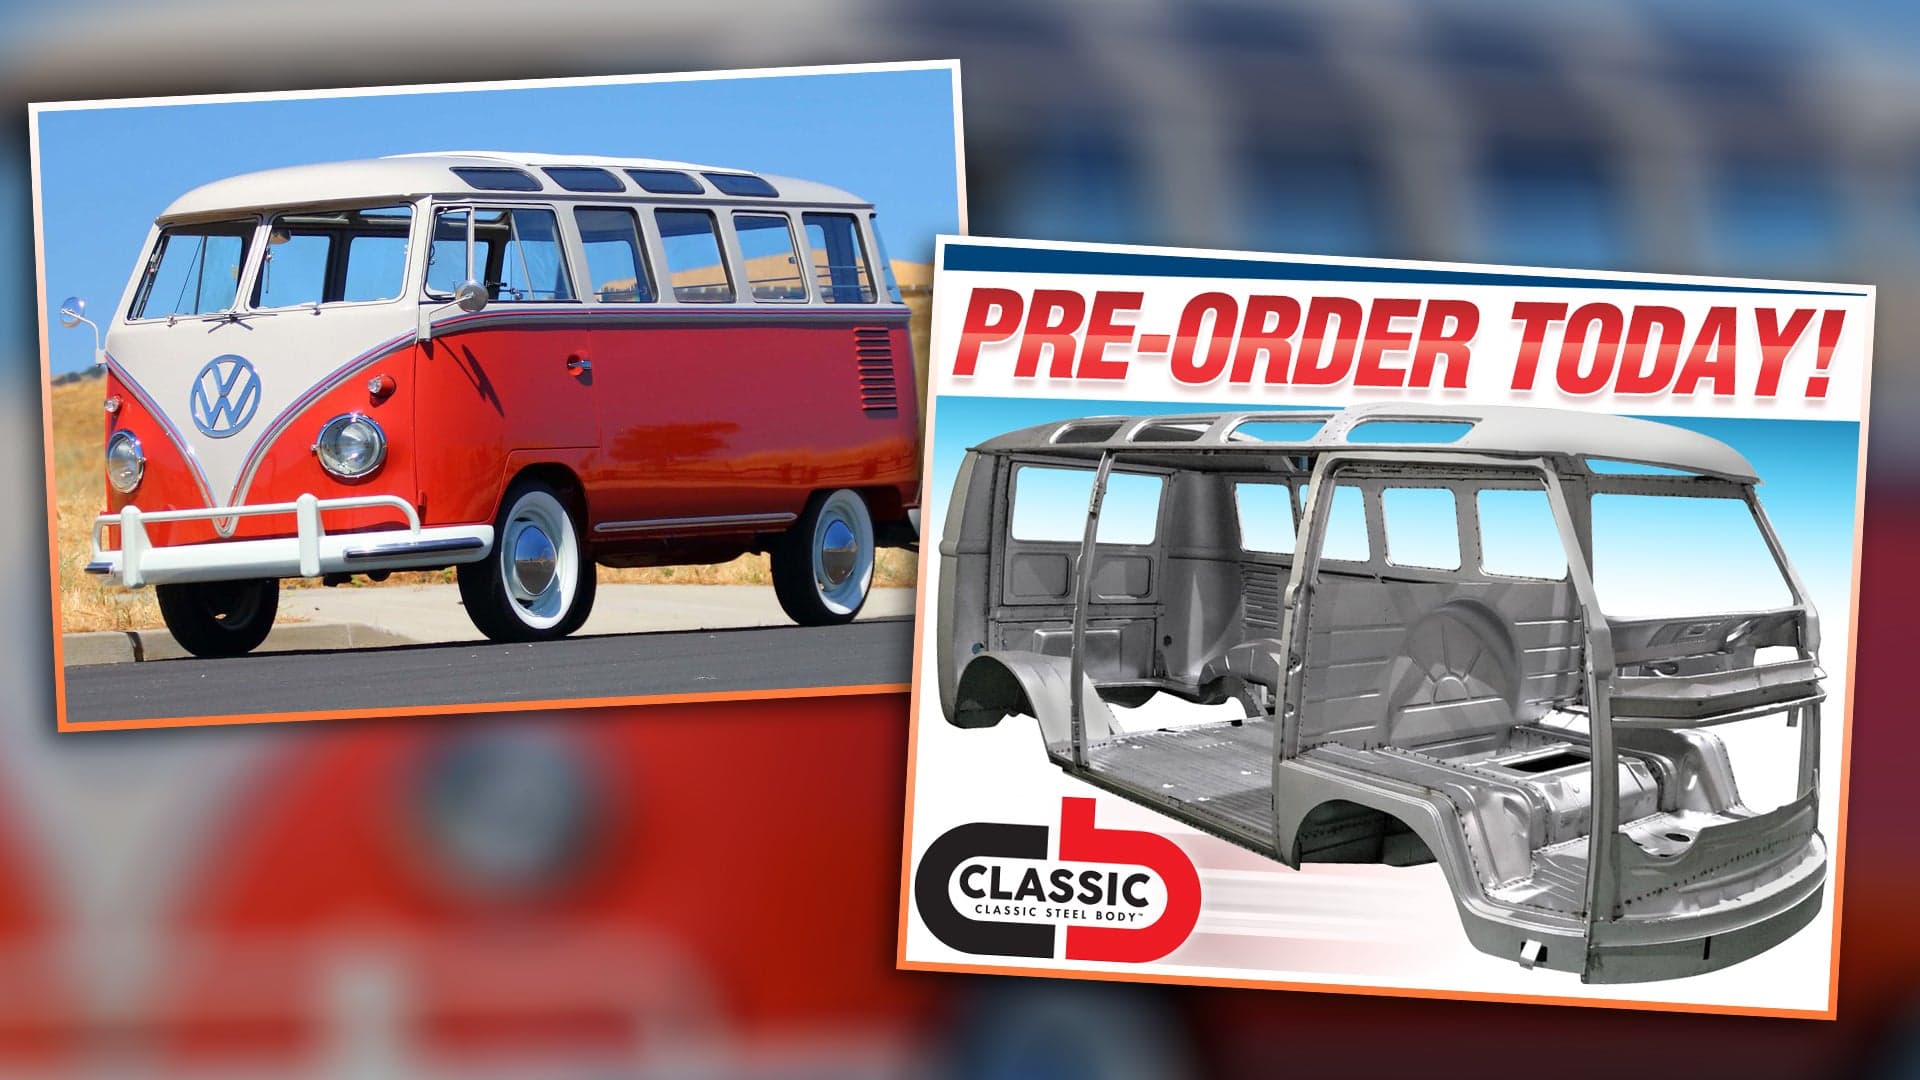 You Can Buy a Brand-New Classic VW Bus Body for Your Next Crazy Project